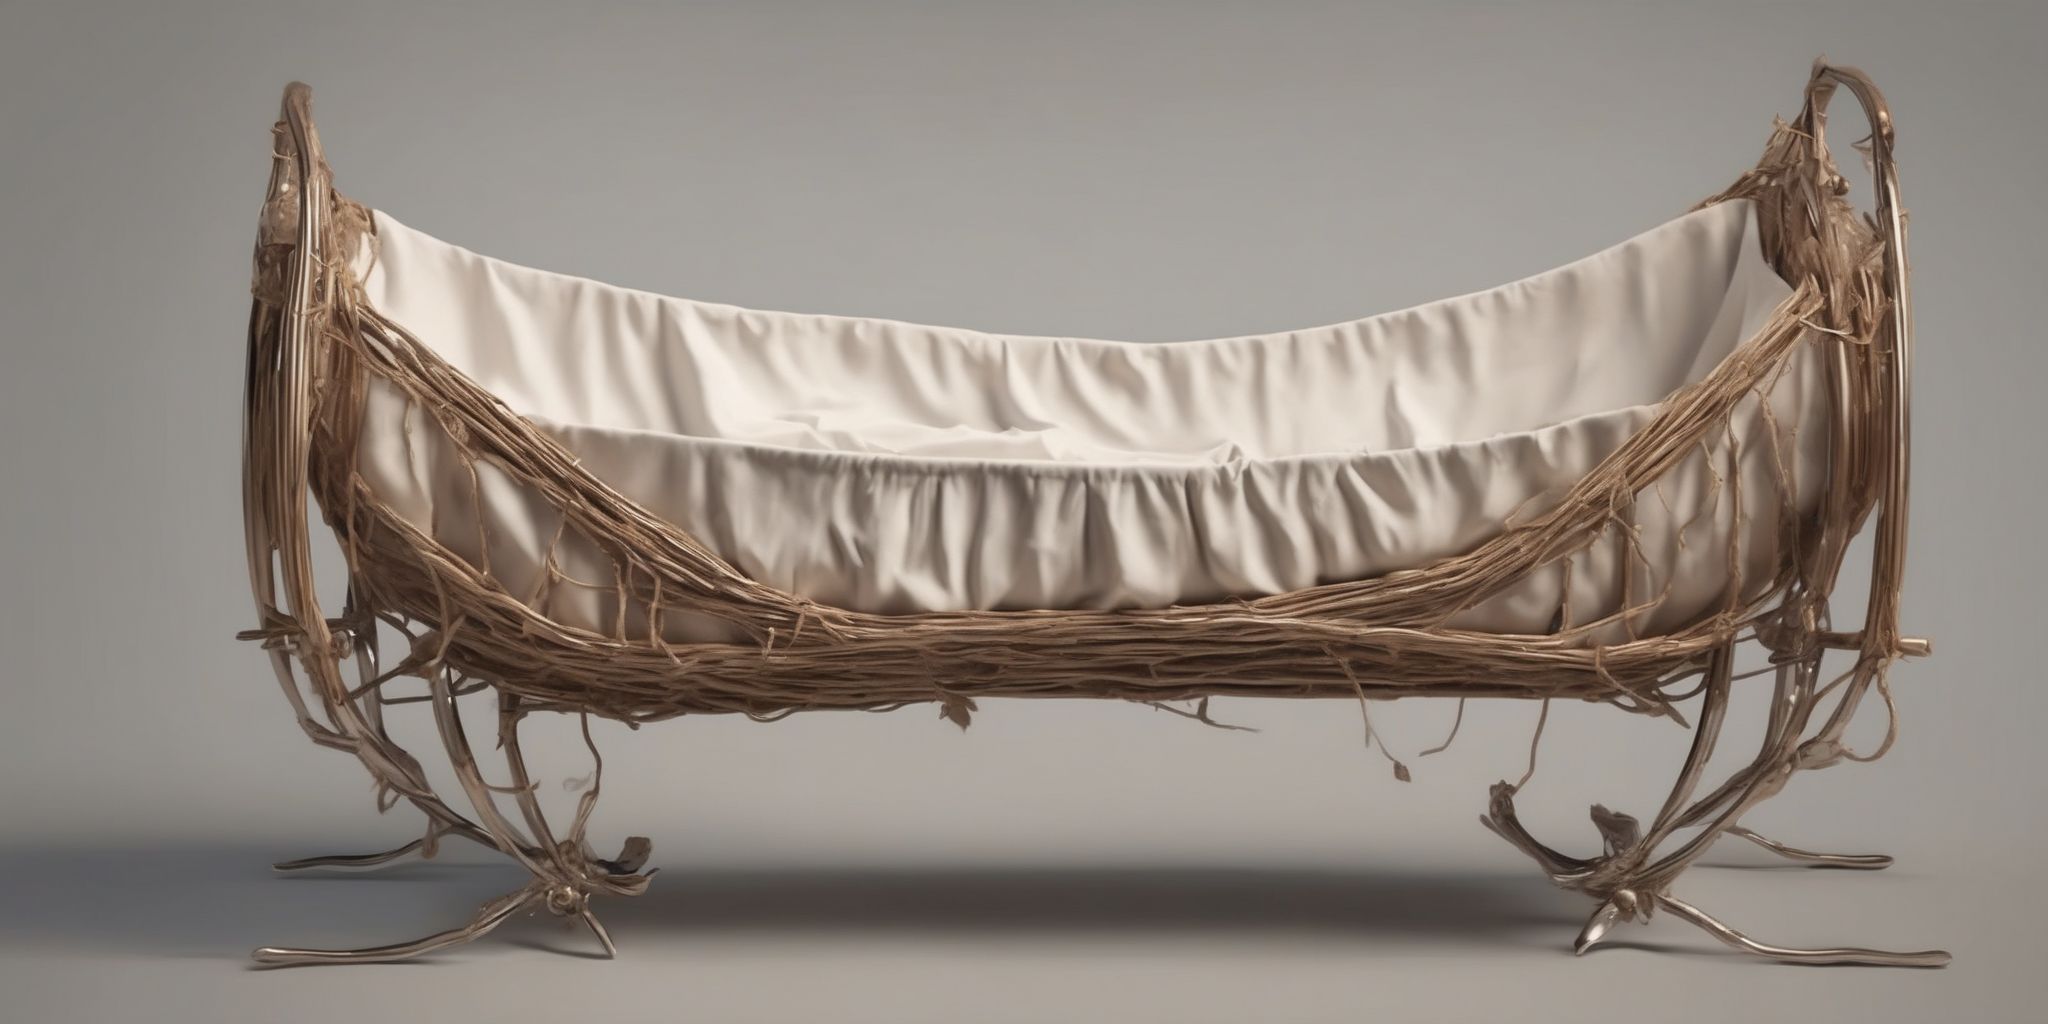 Cradle  in realistic, photographic style